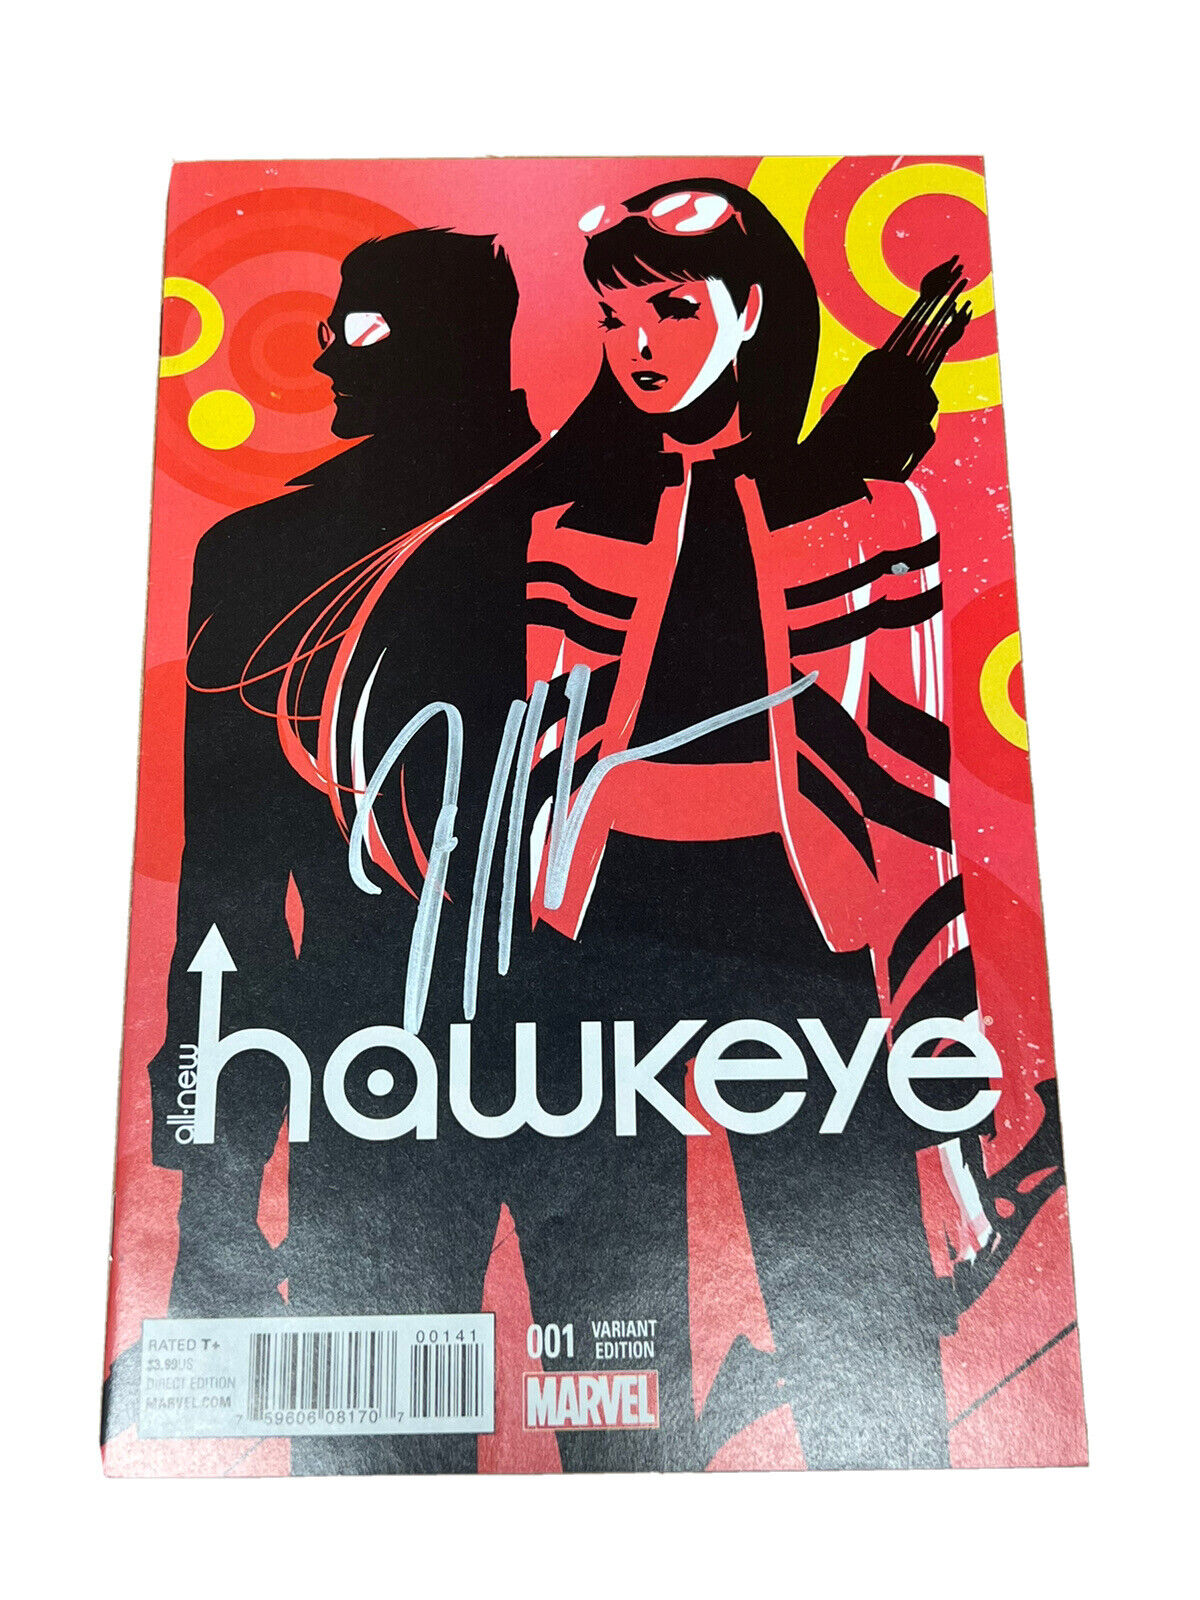 ALL-NEW HAWKEYE #1 SIGNED BY JEFF LEMIRE KATE BISHOP WOMEN OF MARVEL VARIANT COA